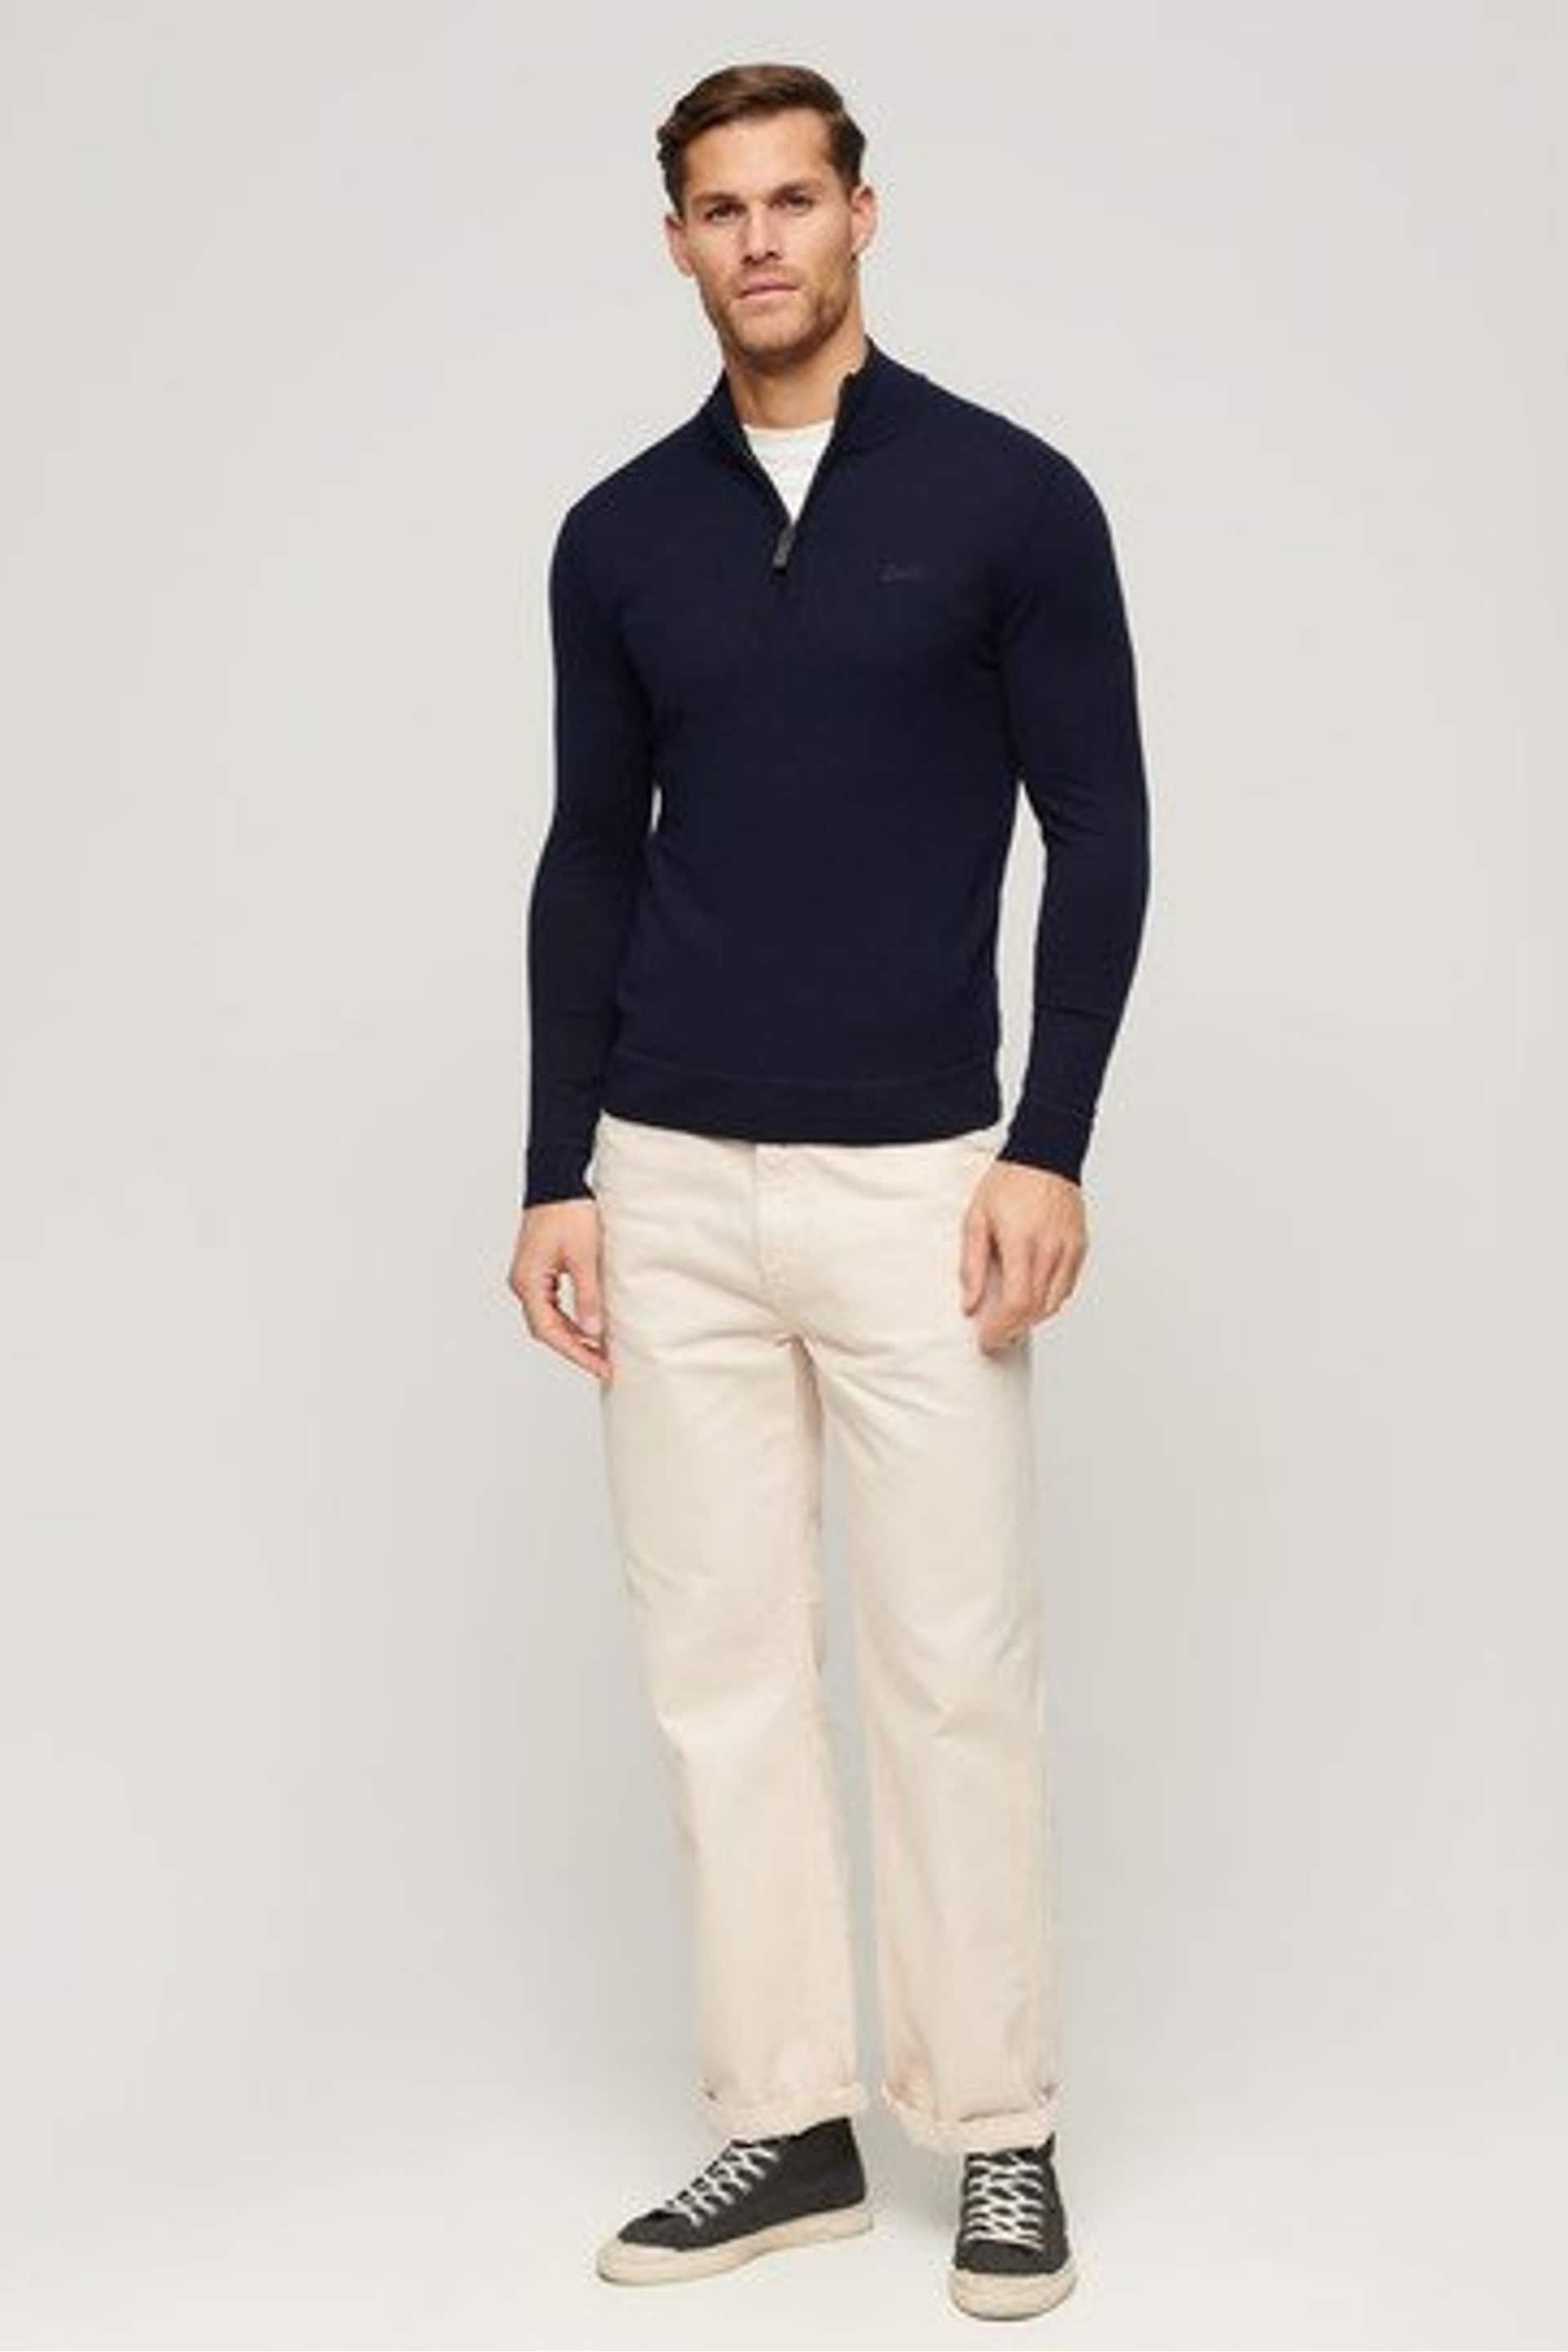 Superdry Blue Henley Cotton Cashmere Knitted Jumper - Image 1 of 6